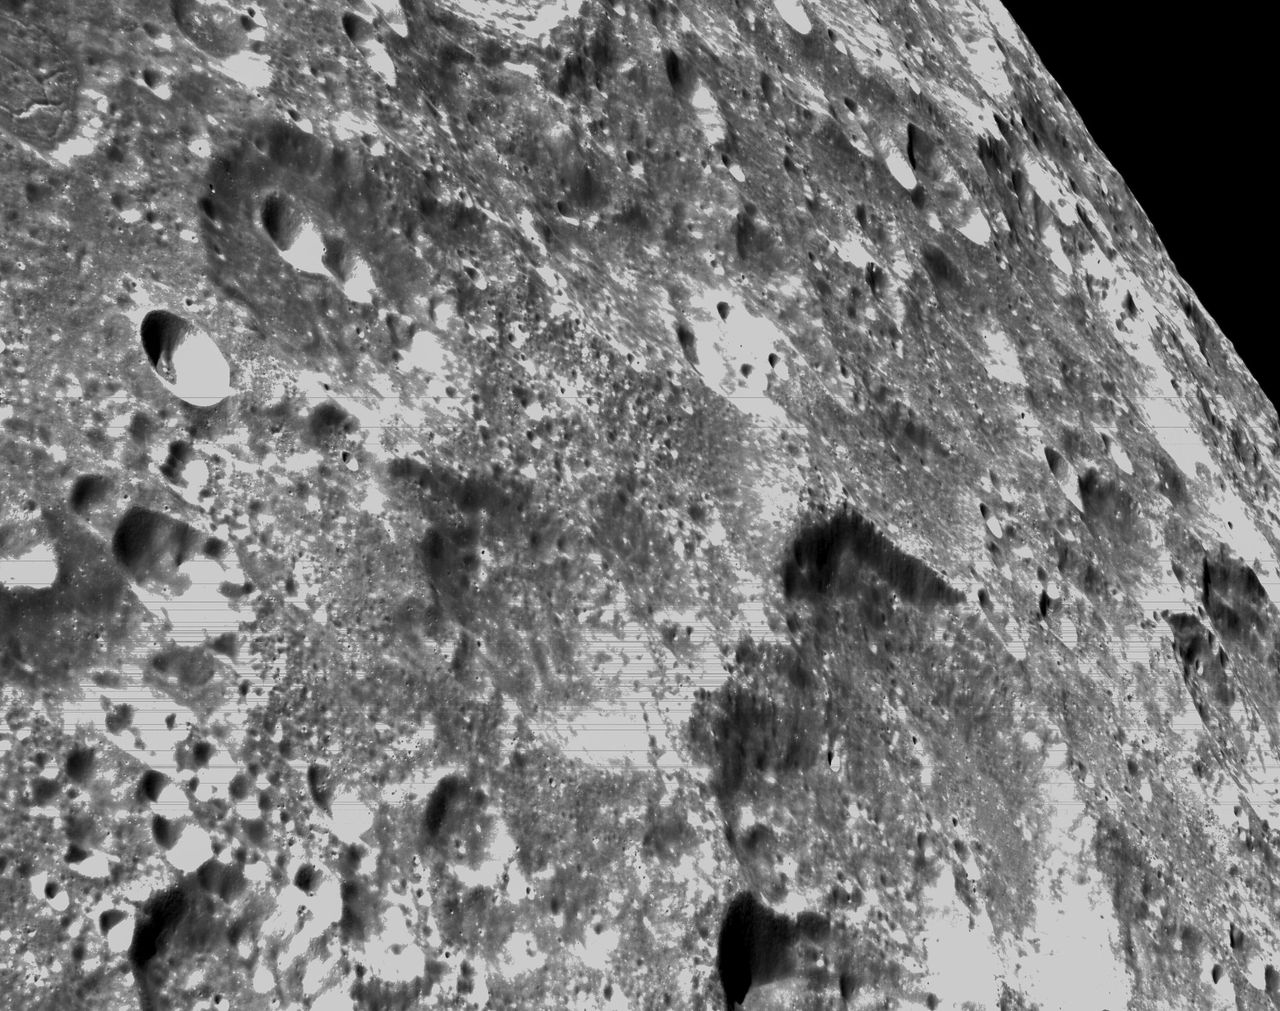 If all goes well with the mission, humans could see these craters IRL in 2024. 